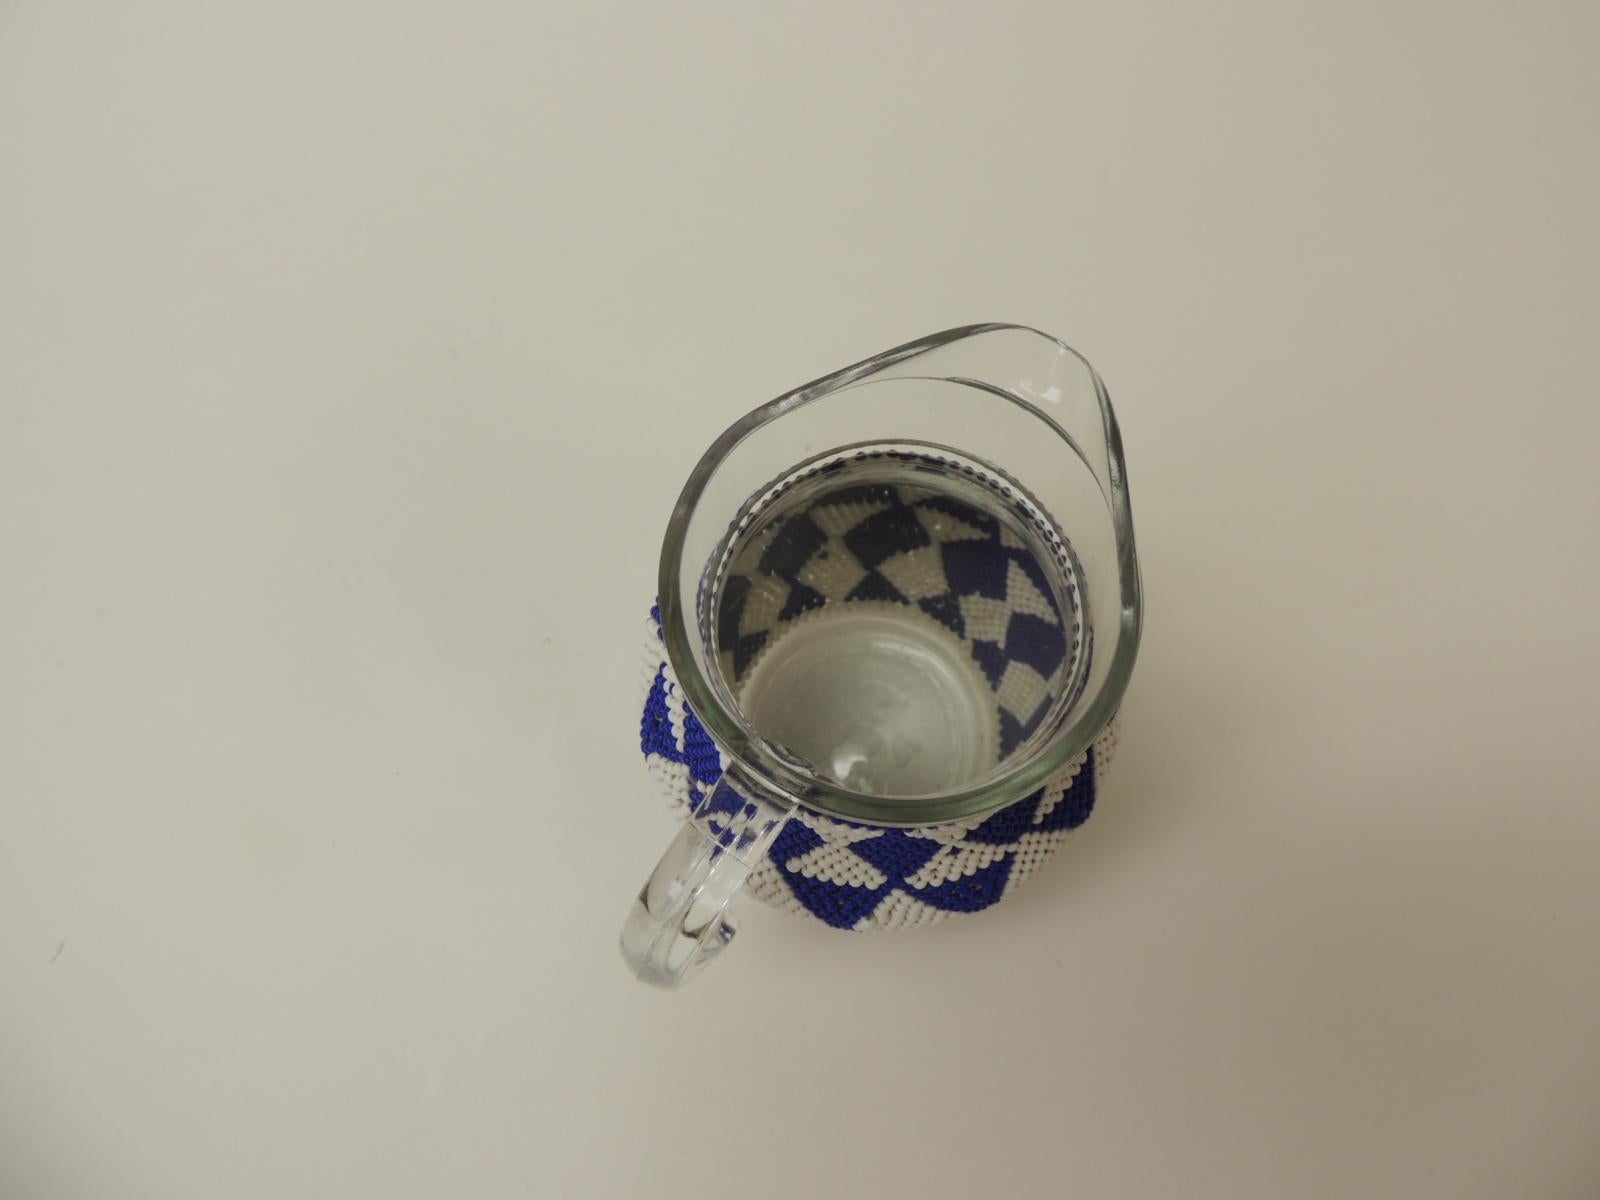 Hand-Crafted Small Vintage Glass Milk Jug with Handcrafted Artisanal Woven Beaded Cover